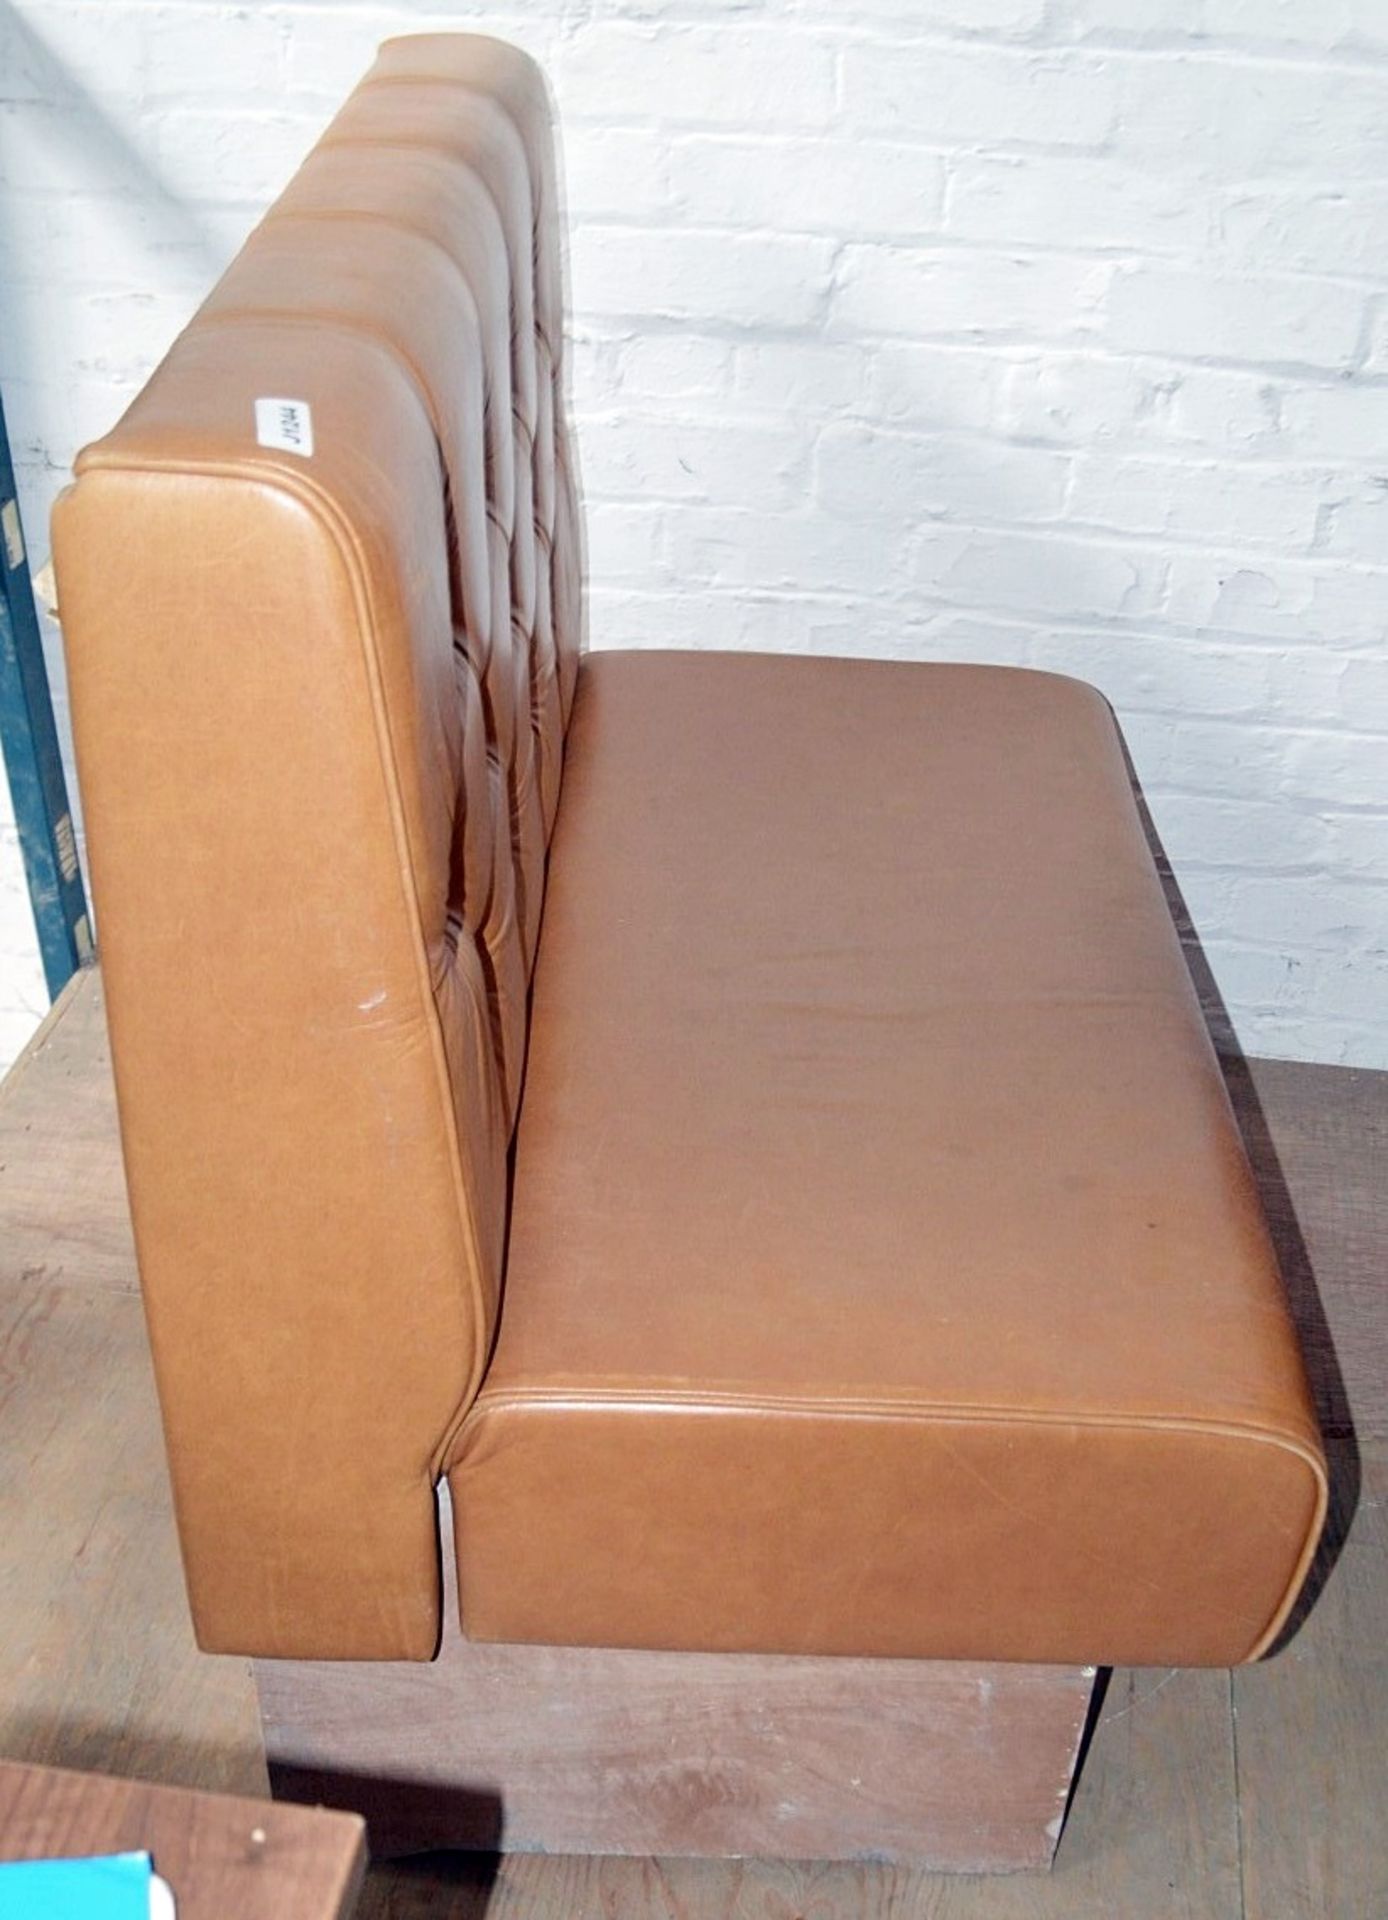 1 x Contemporary Seating Booth Section Upholstered In A Tan Coloured Leather - Image 2 of 9